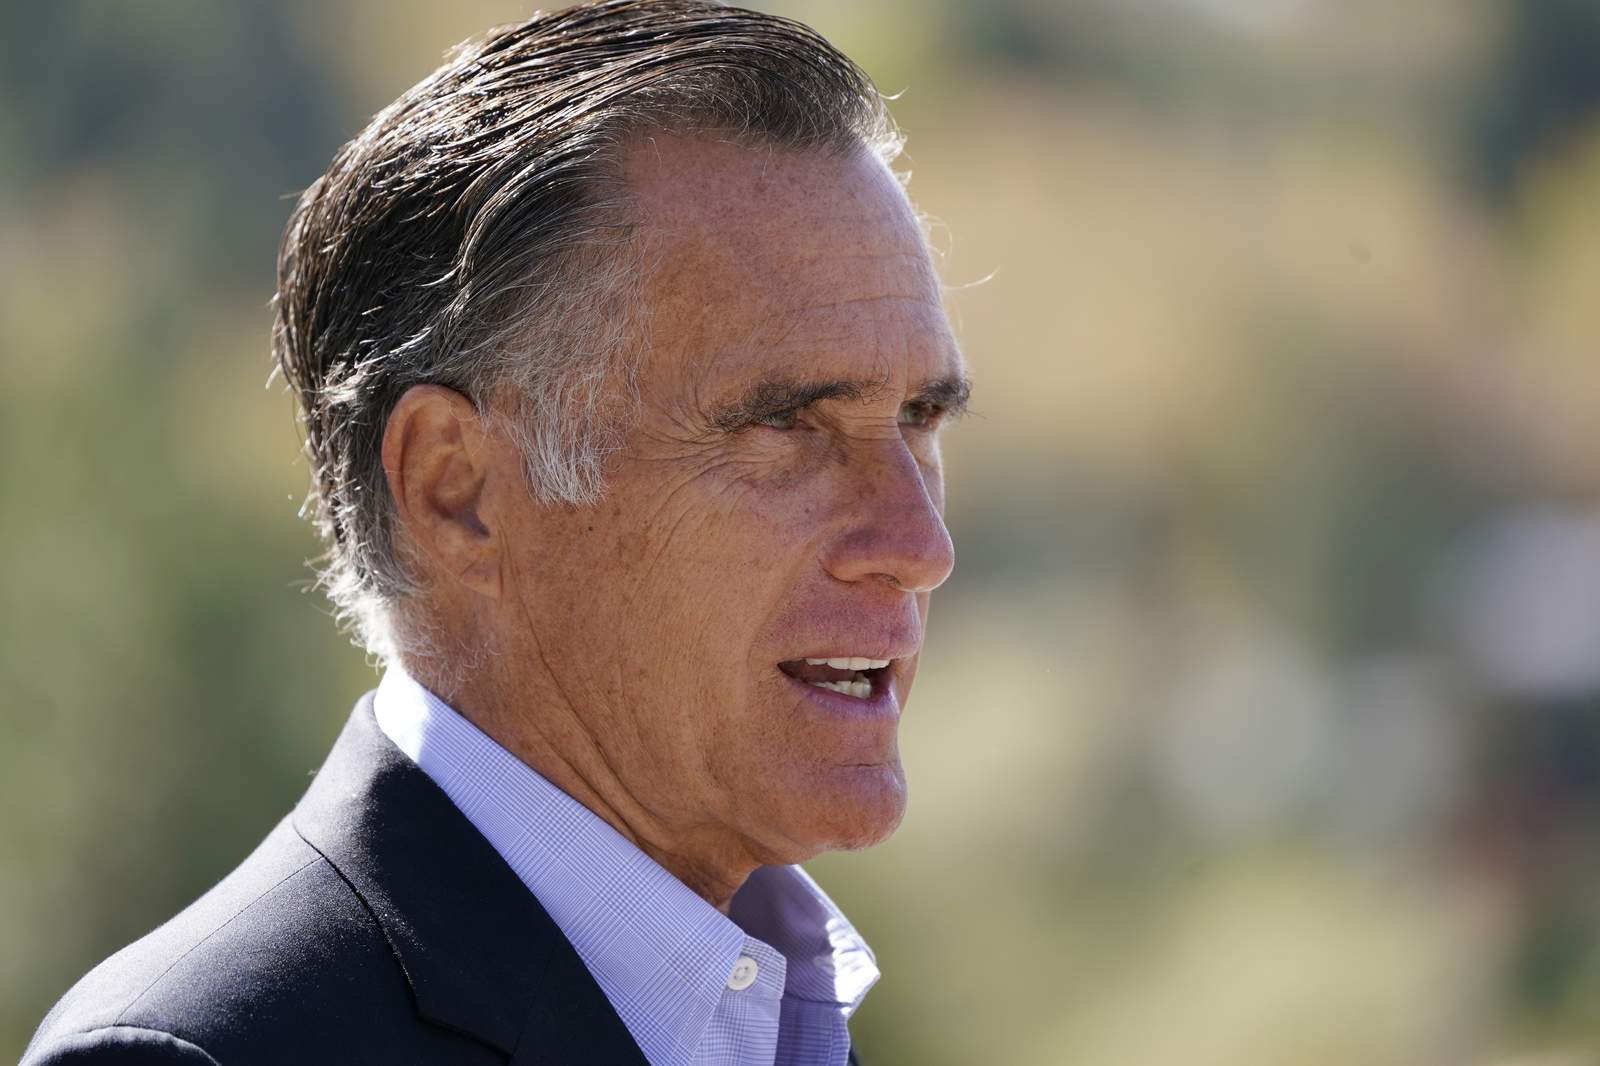 GOP's Romney, long a Trump critic, voted — but not for Trump